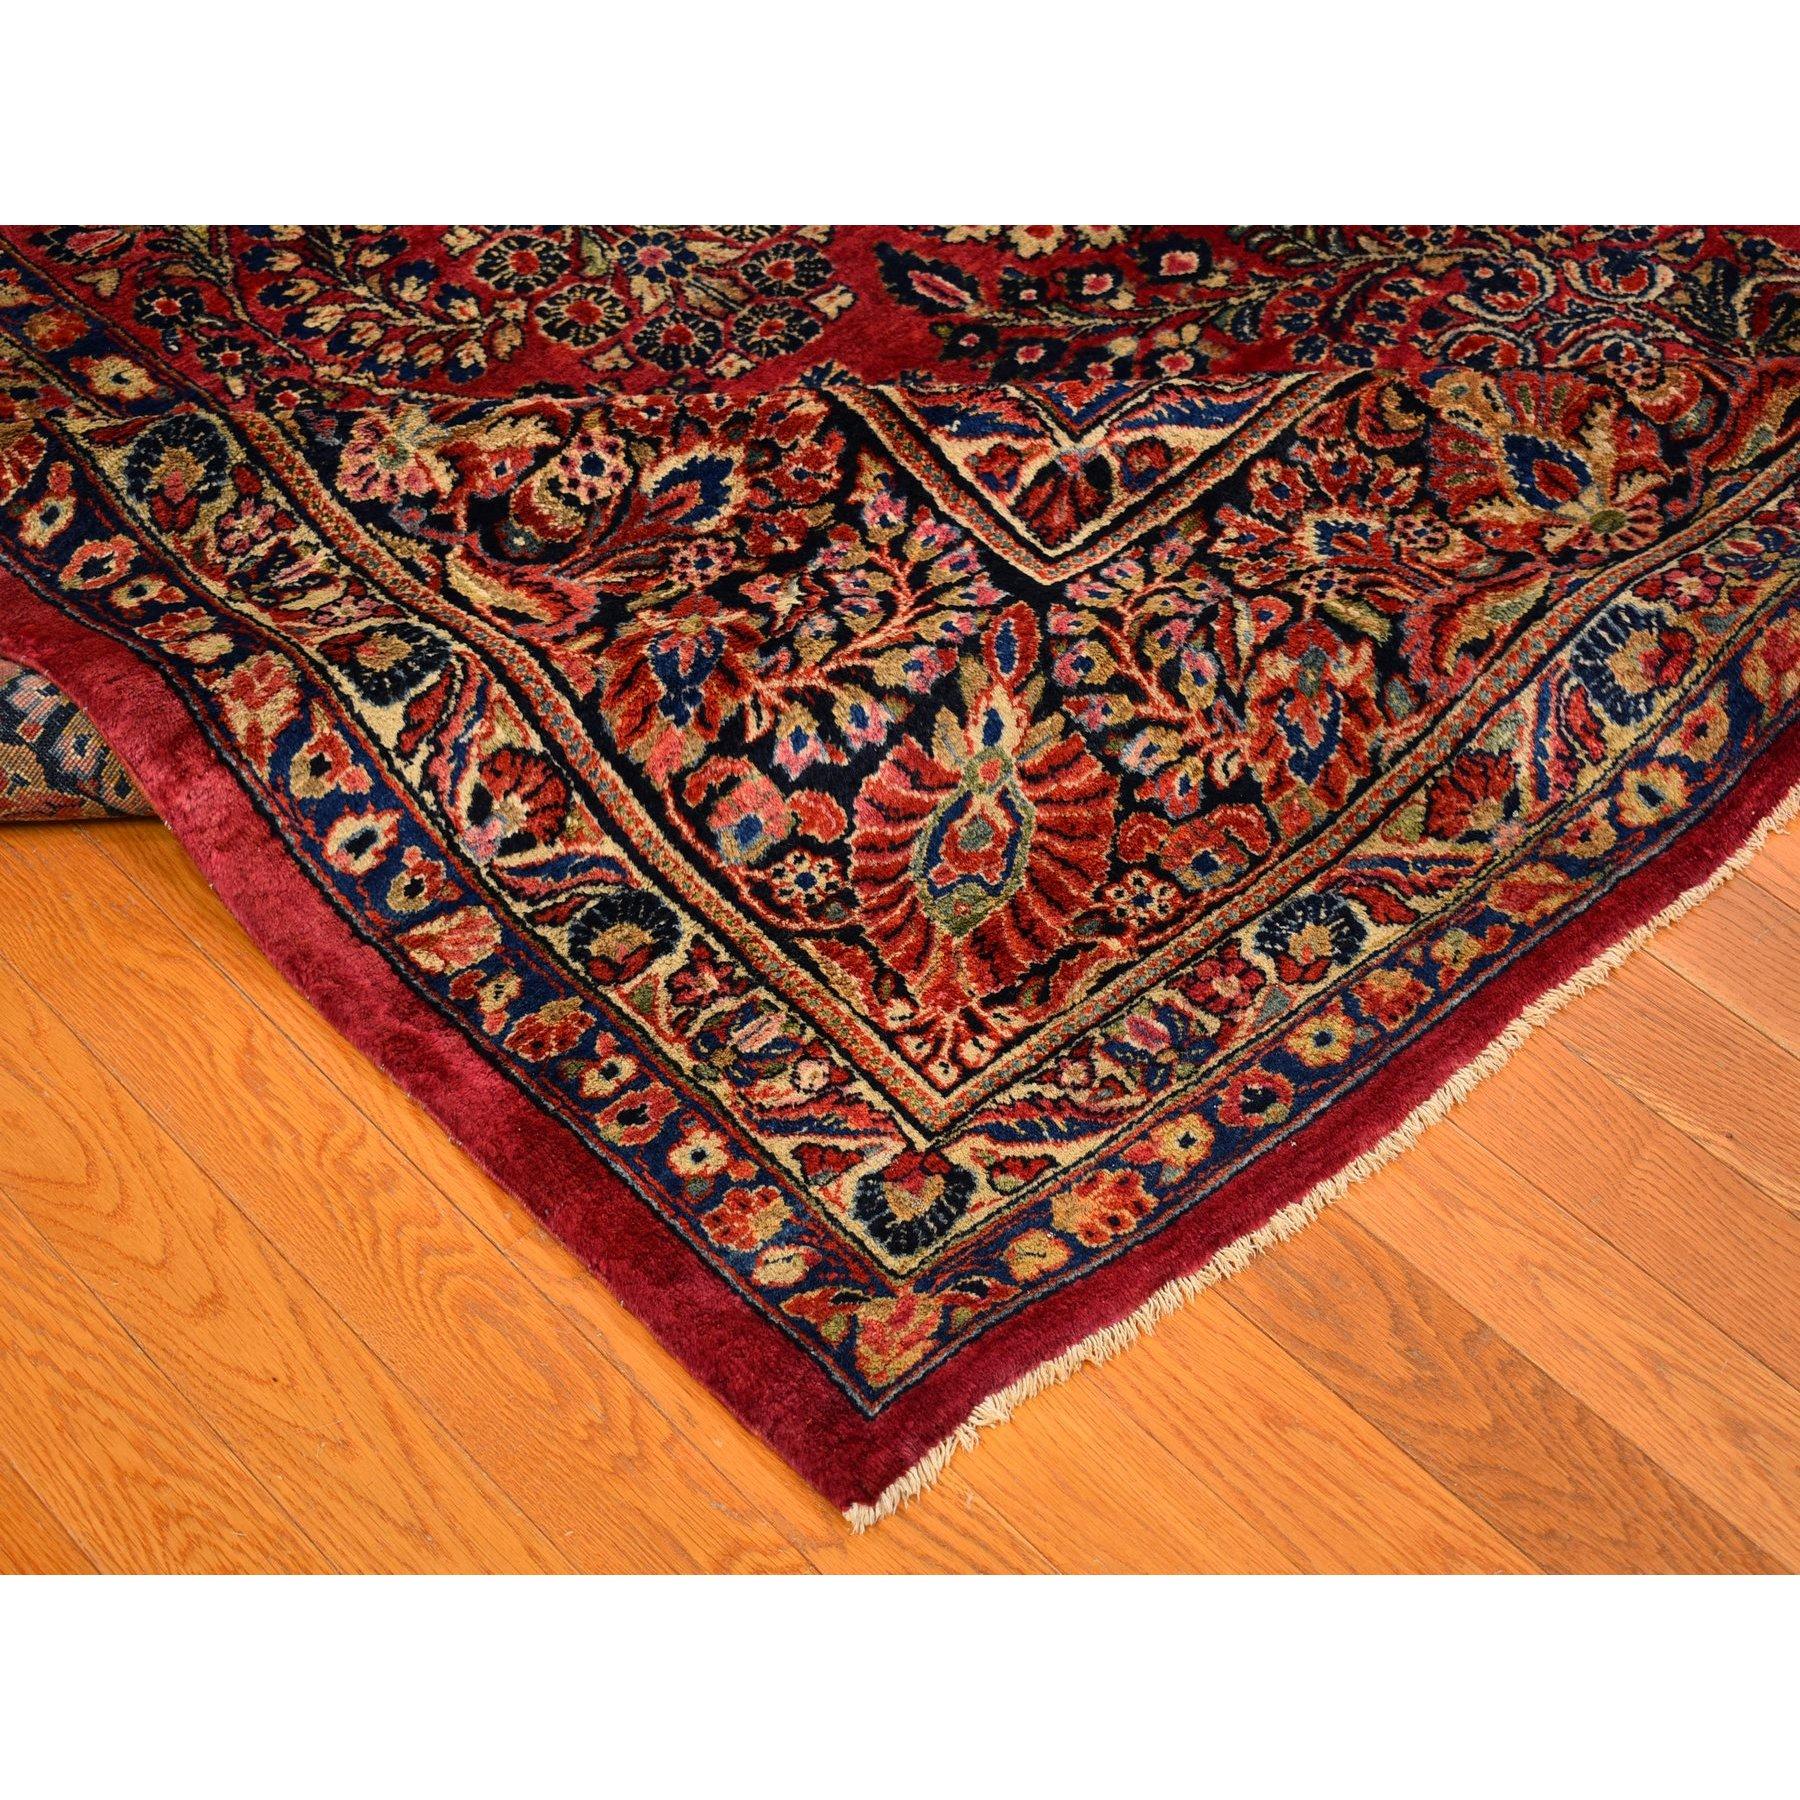 Early 20th Century Oversized Red Antique Persian Sarouk Soft Wool Full Pile Hand Knotted Rug